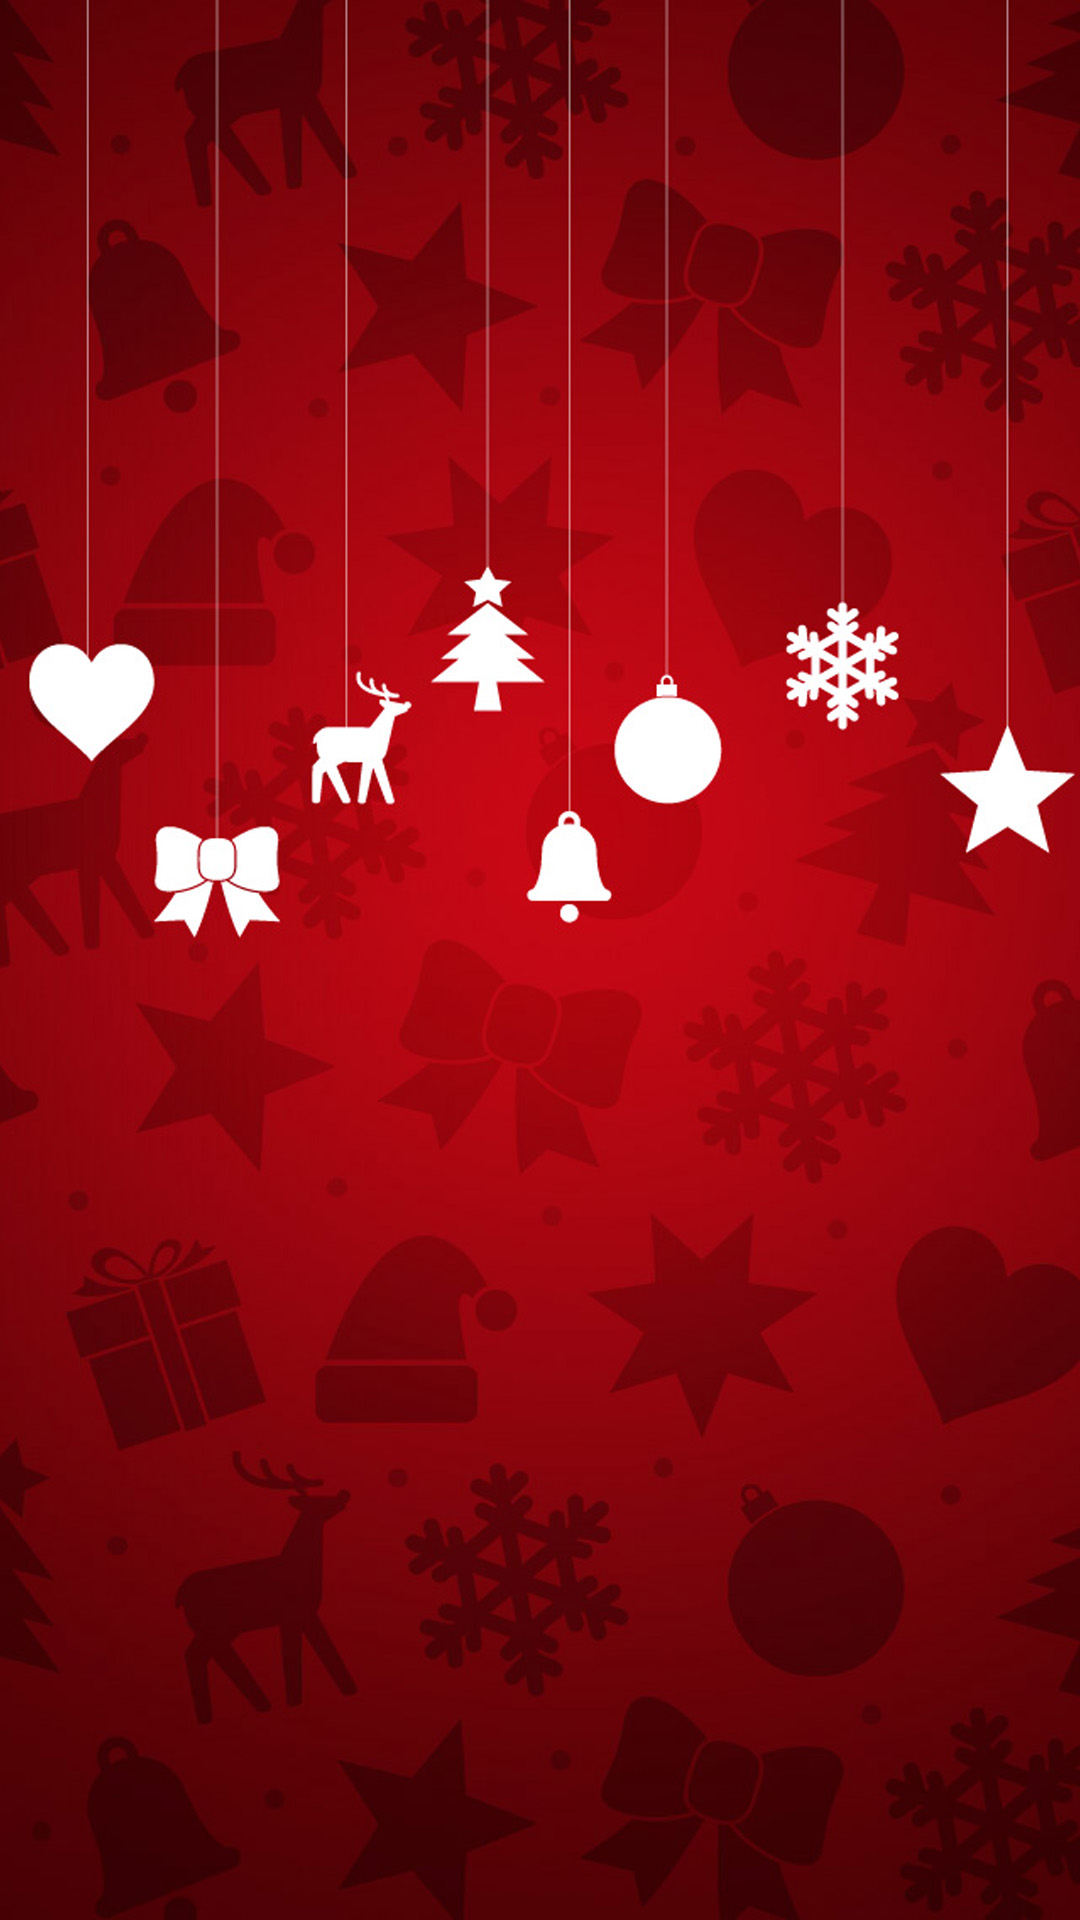 Minimal Christmas Ornaments Red Background Android Wallpaper free ...